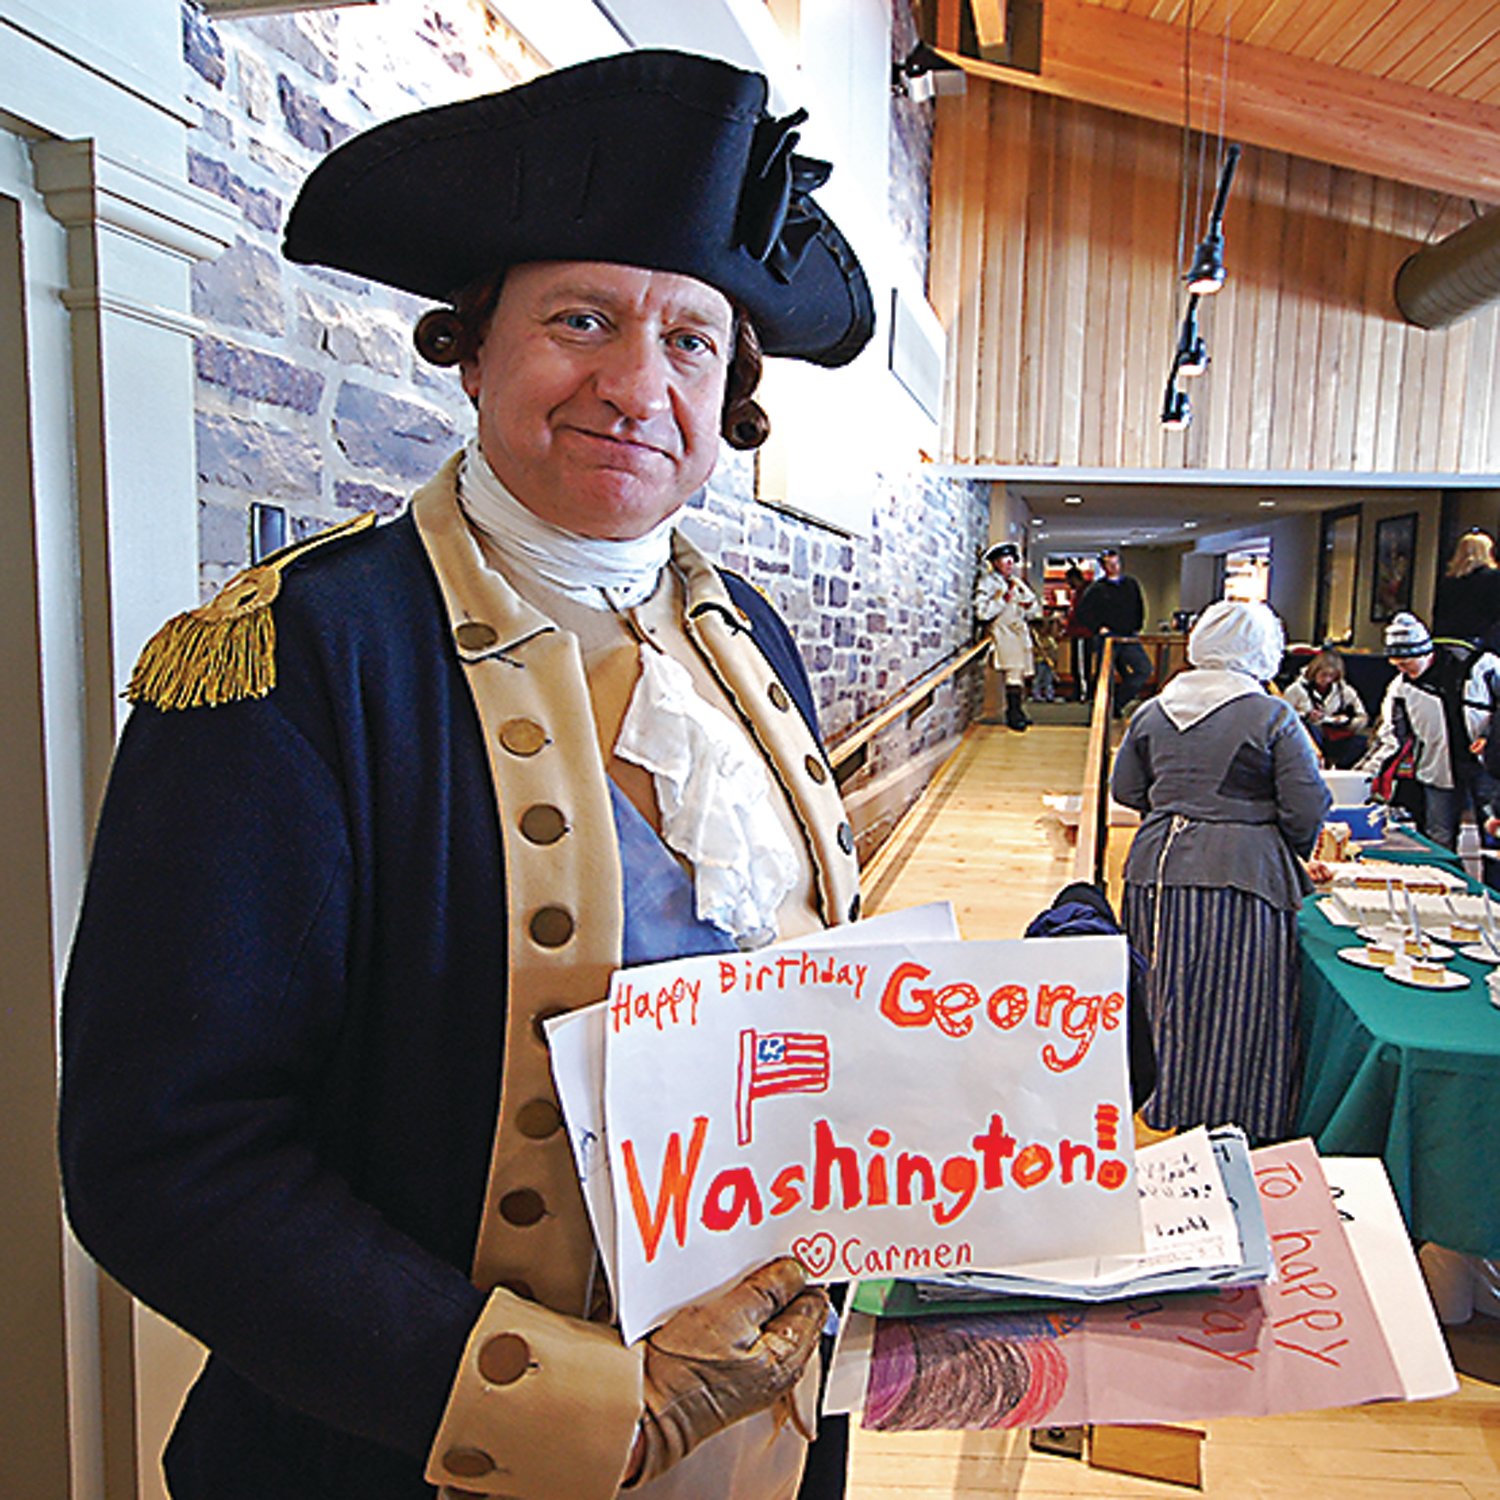 “George Washington” holds handmade birthday cards made just for him. Children are once again invited to create birthday cards for the general and bring them to his birthday party. They can also enter the “Let’s Draw George” contest.